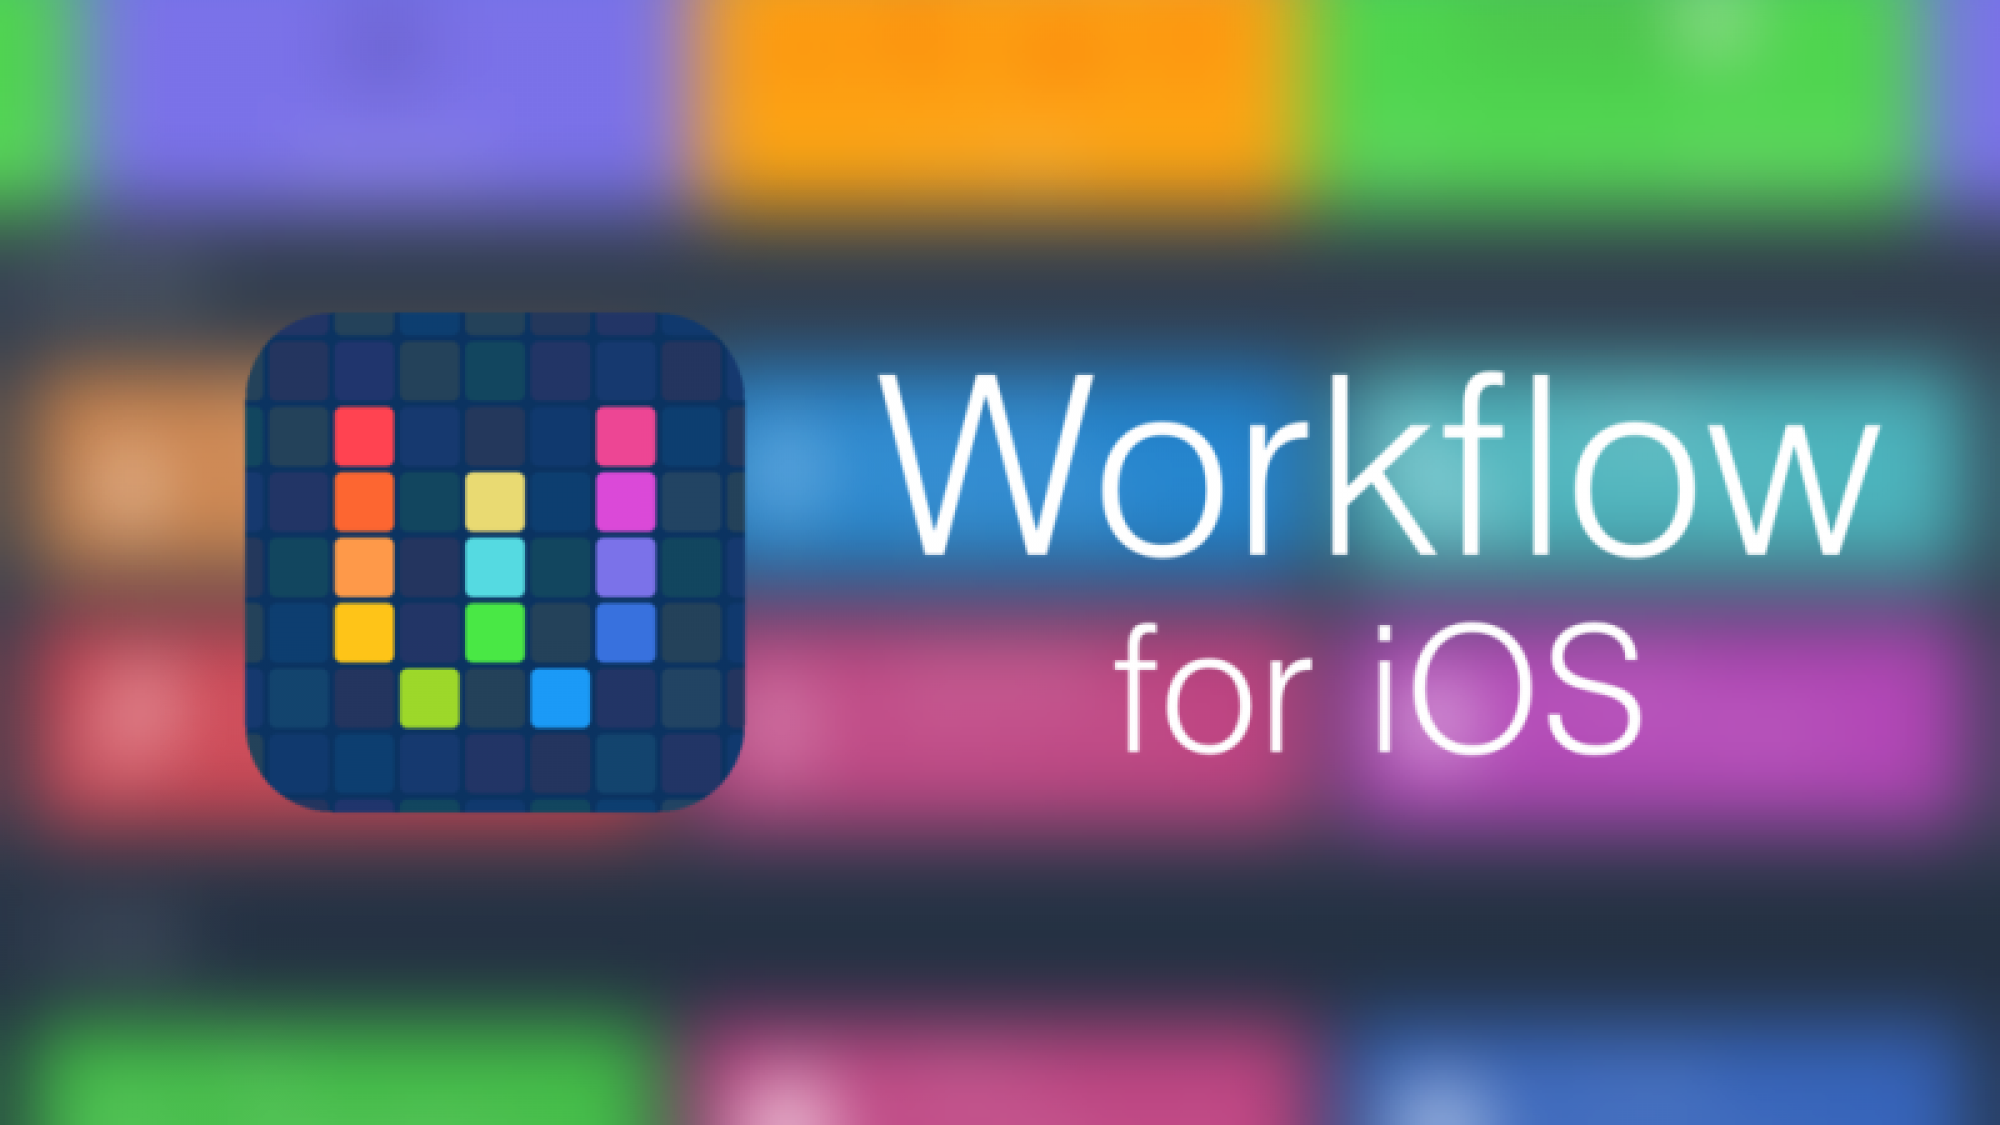 Workflow by Apple